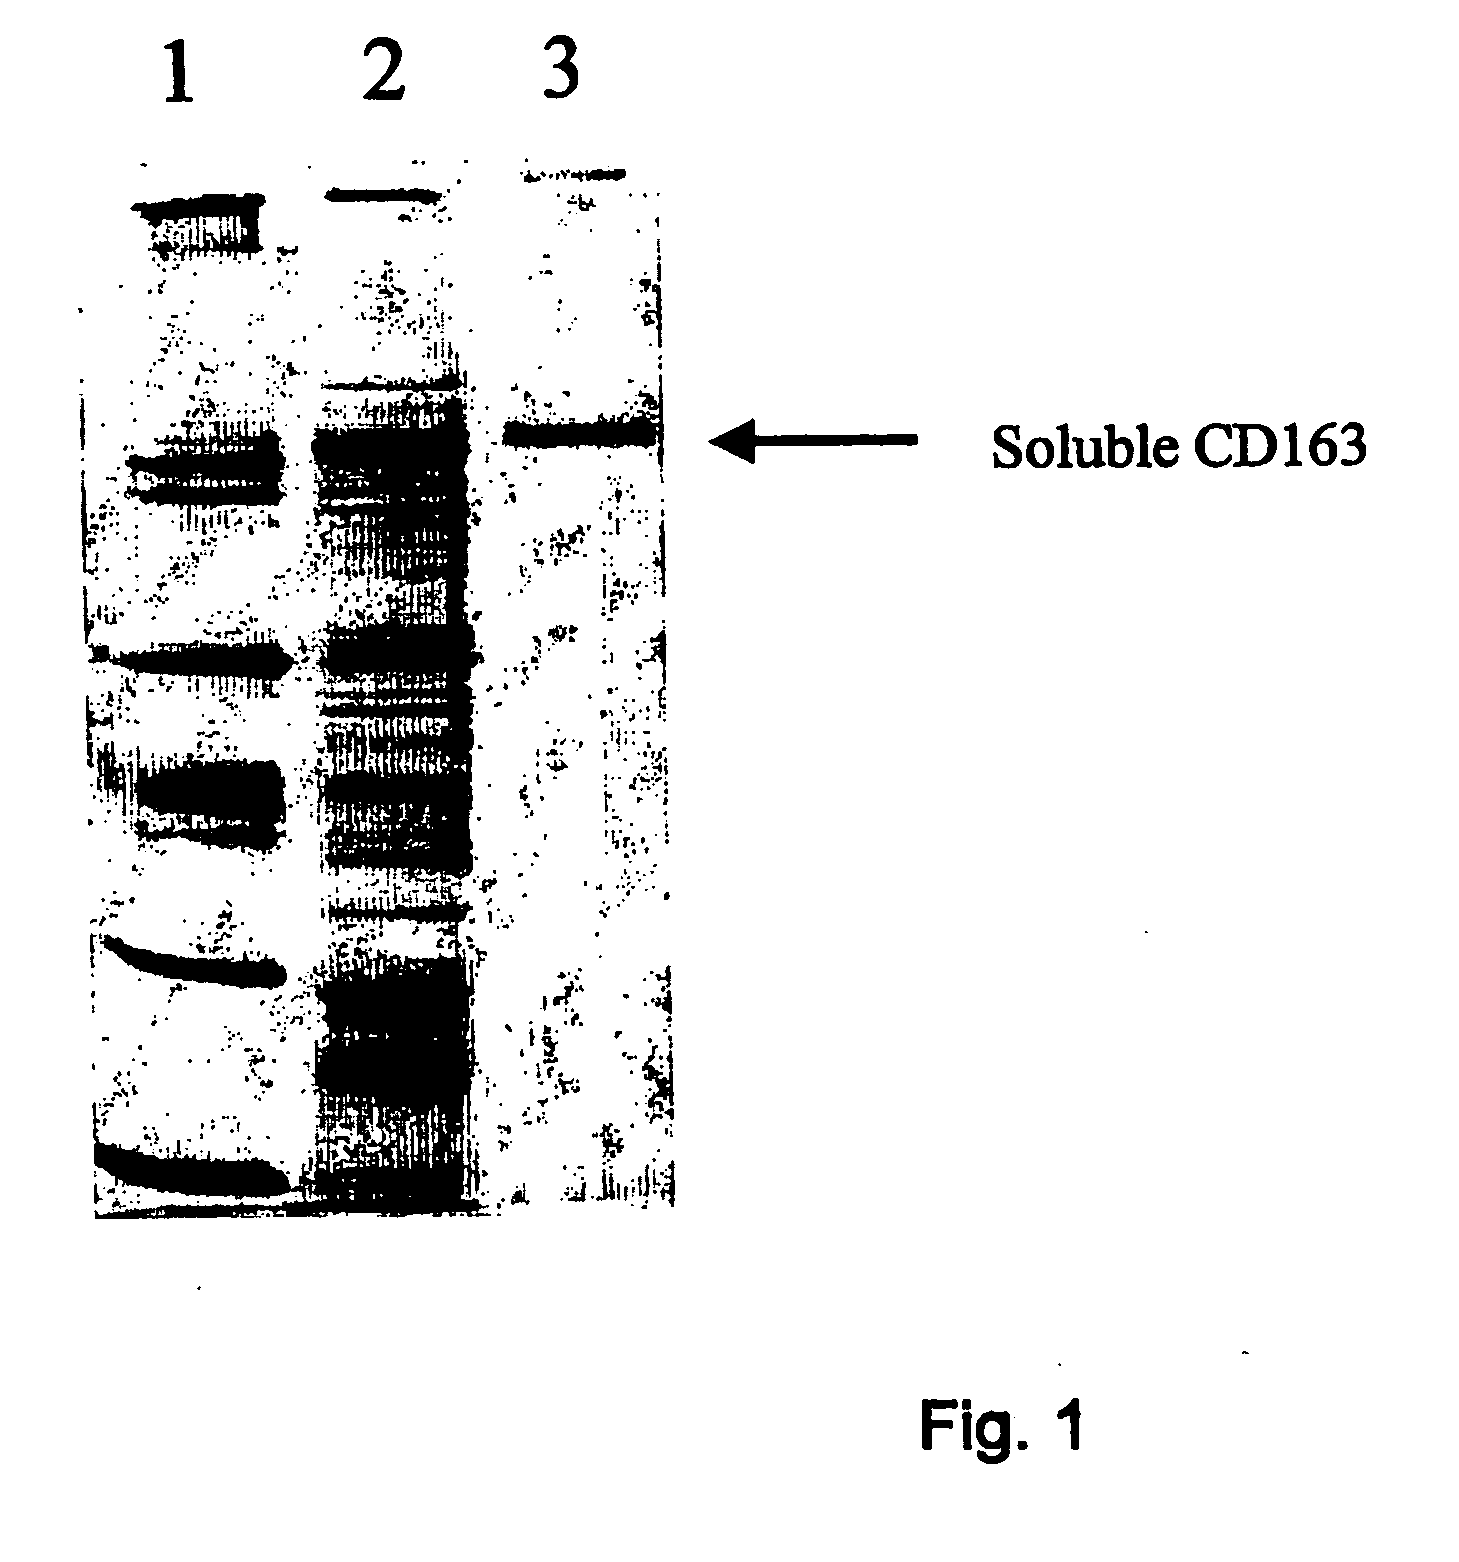 Methods for using the CD163 pathway for modulating an immune response